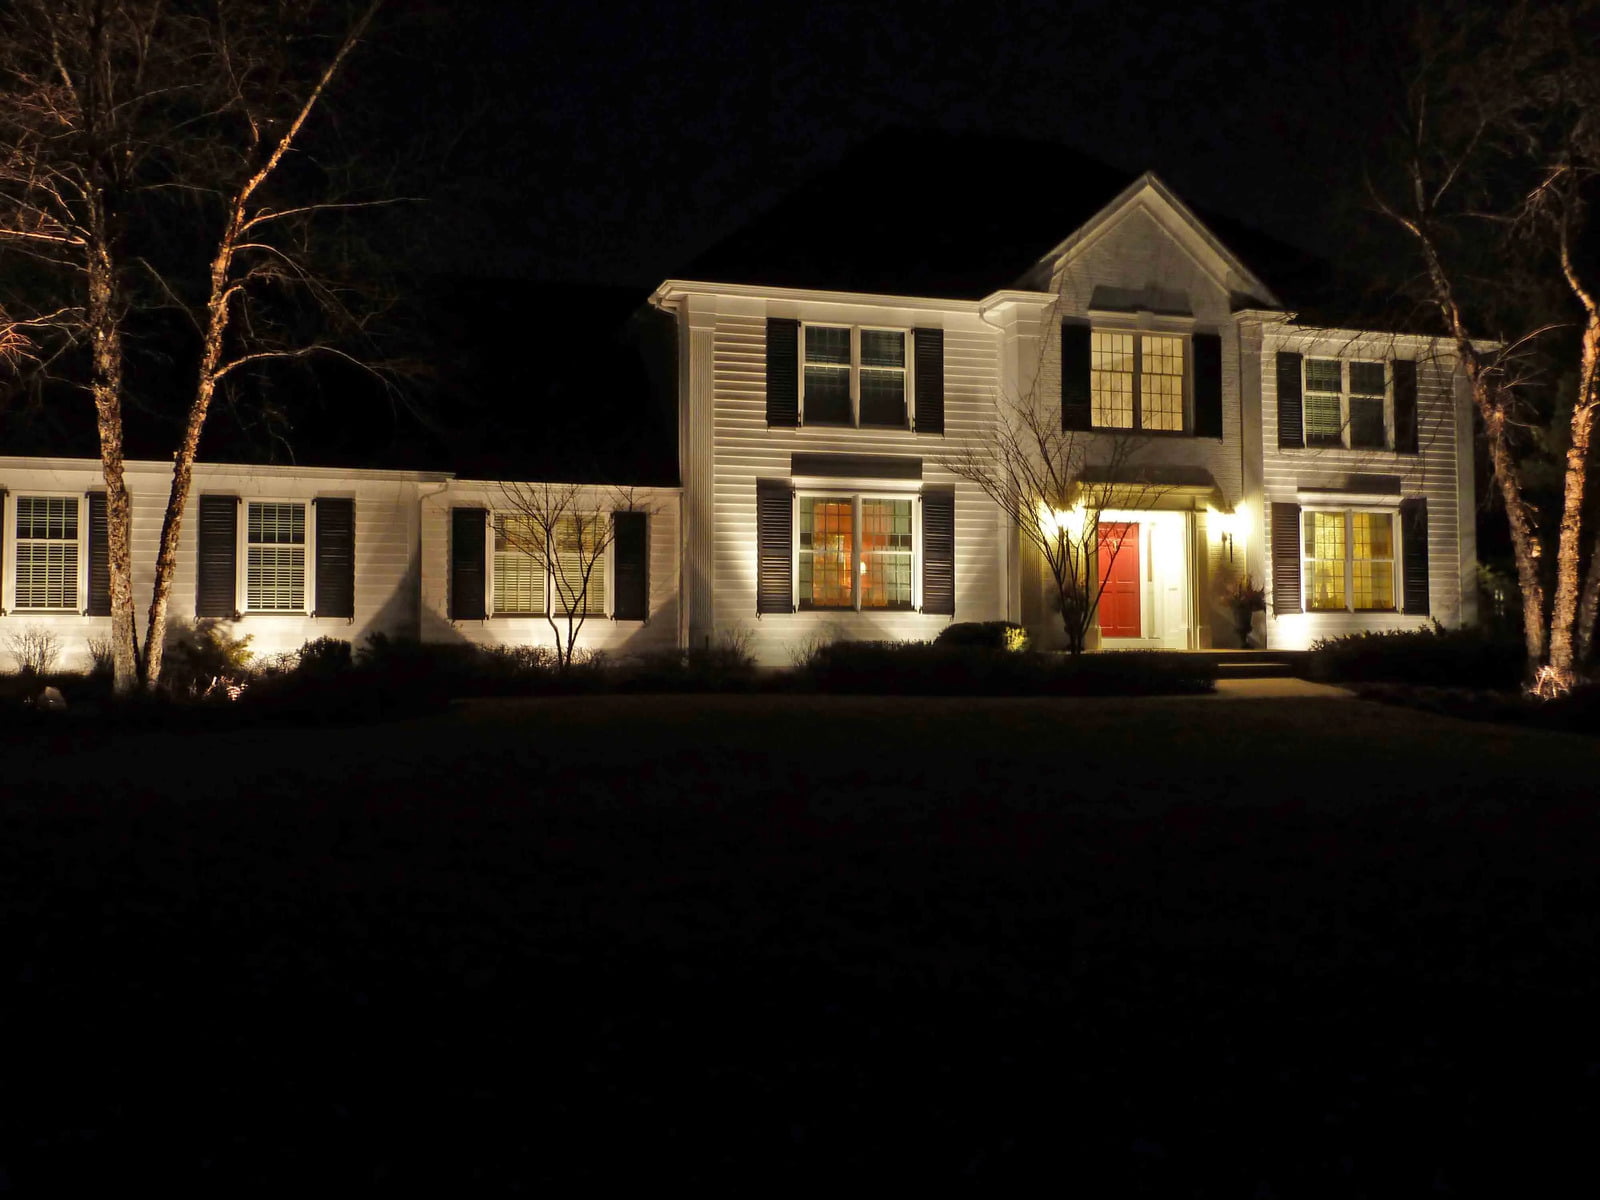 Premier Siding Contractor in Chicago: Enhance Your Home's Beauty and Value